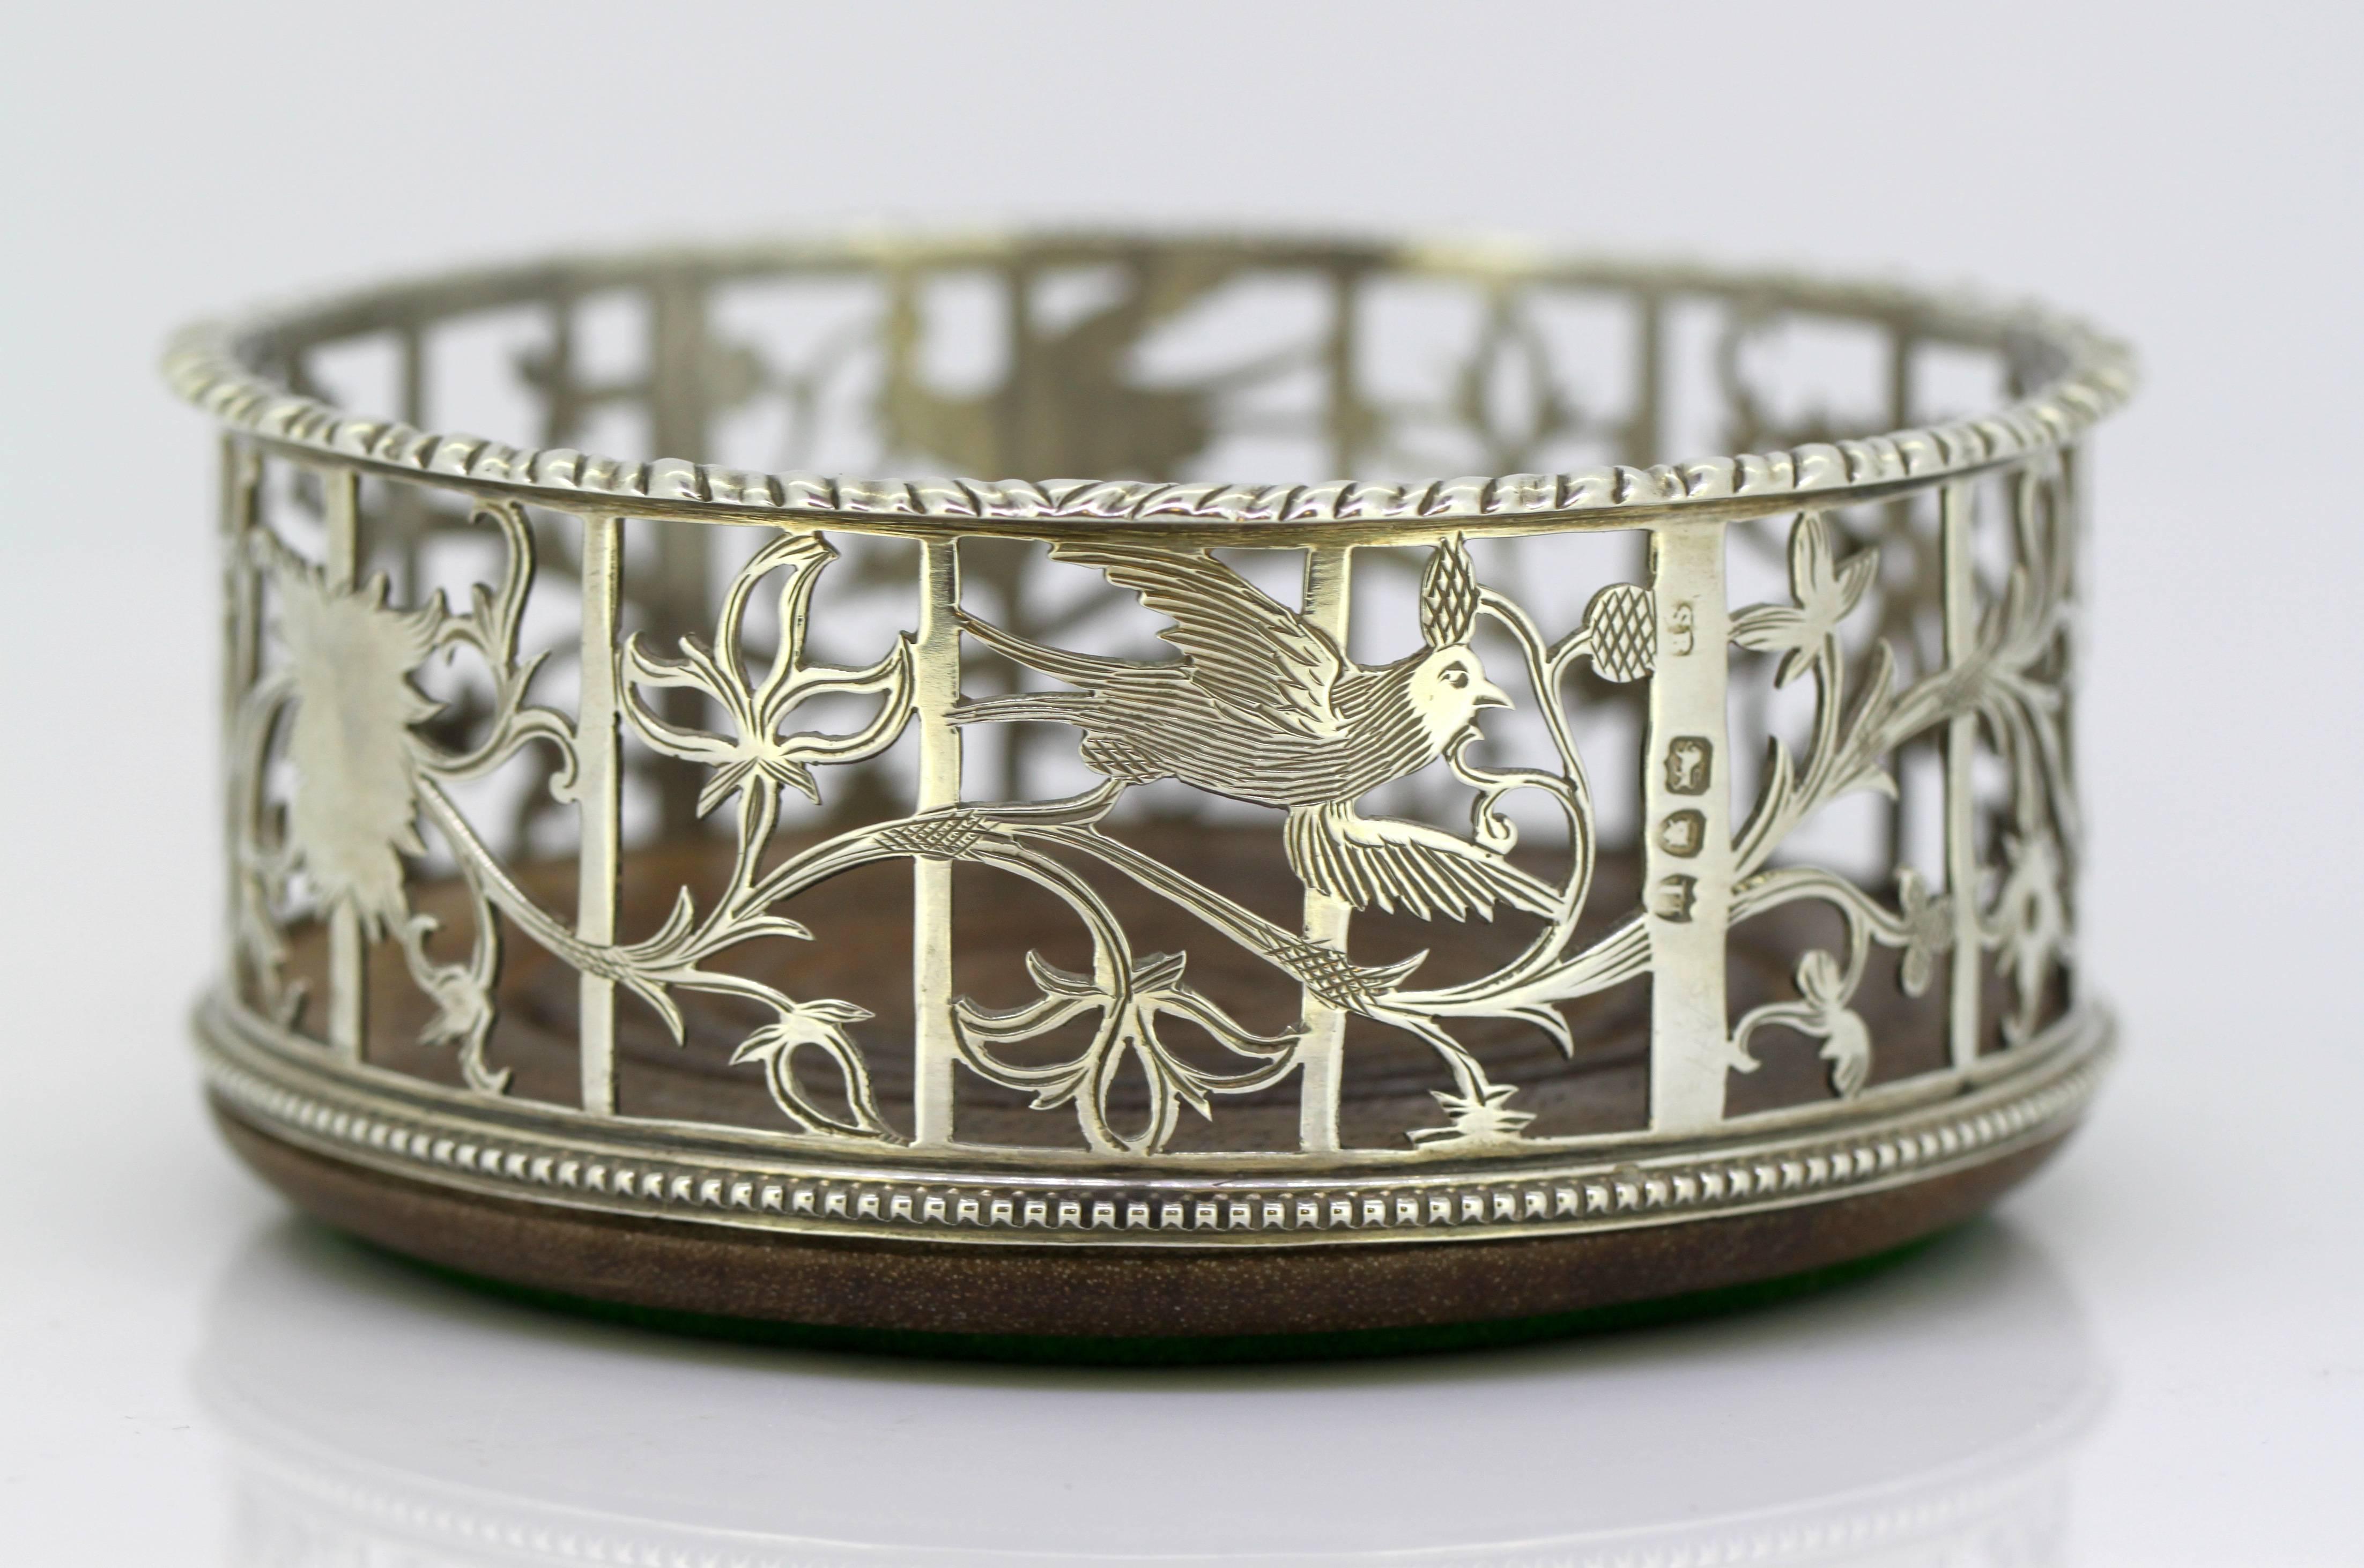 British Victorian Sterling Silver Wine Coaster by Samuel Beaumont, London, 1895